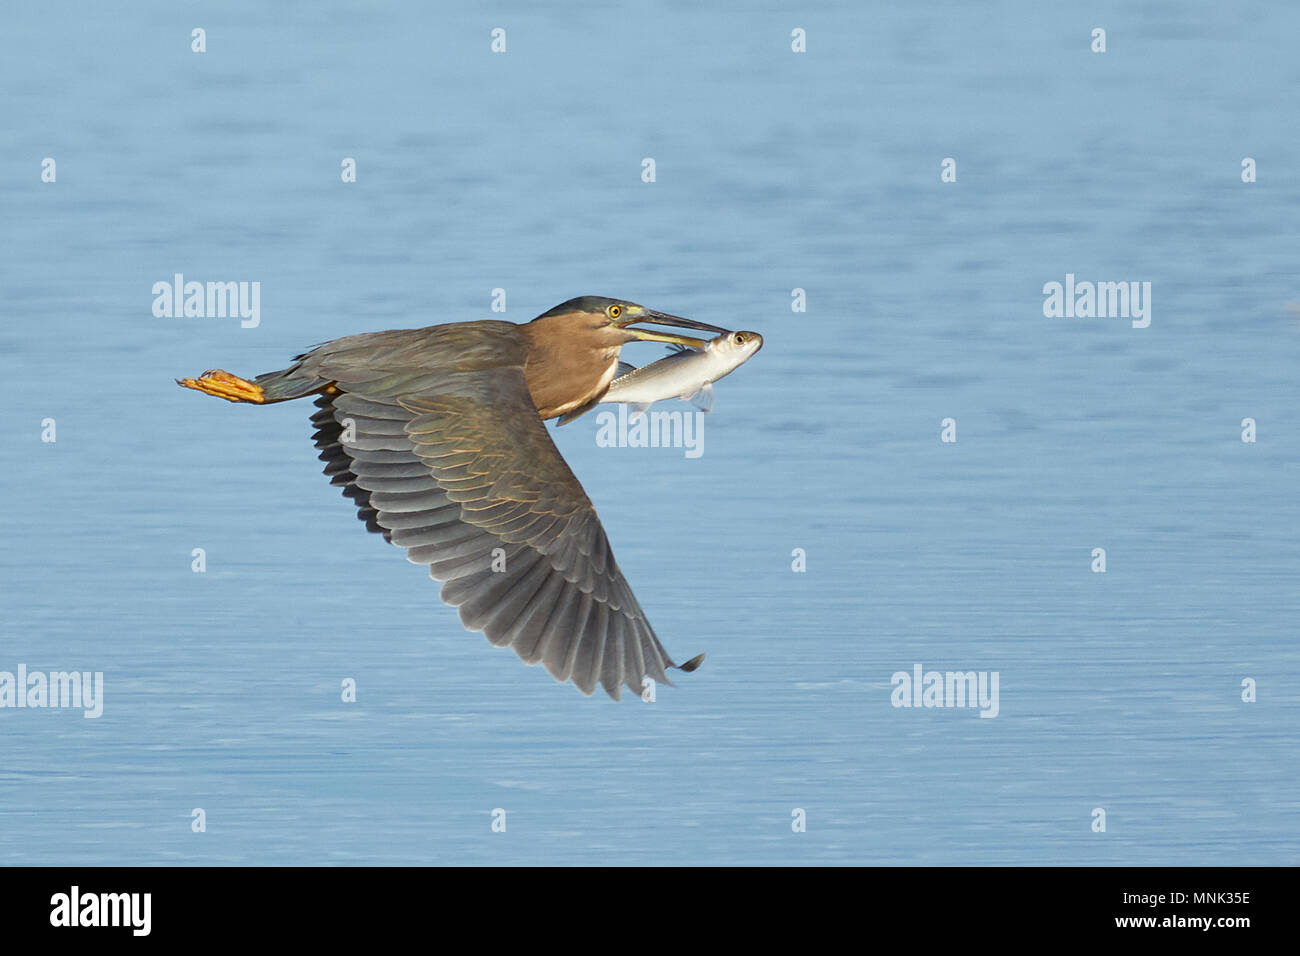 A Striated Heron (Butorides Striata) flying against a background of blue water with its recently caught fish in its beak, New South Wales, Australia Stock Photo